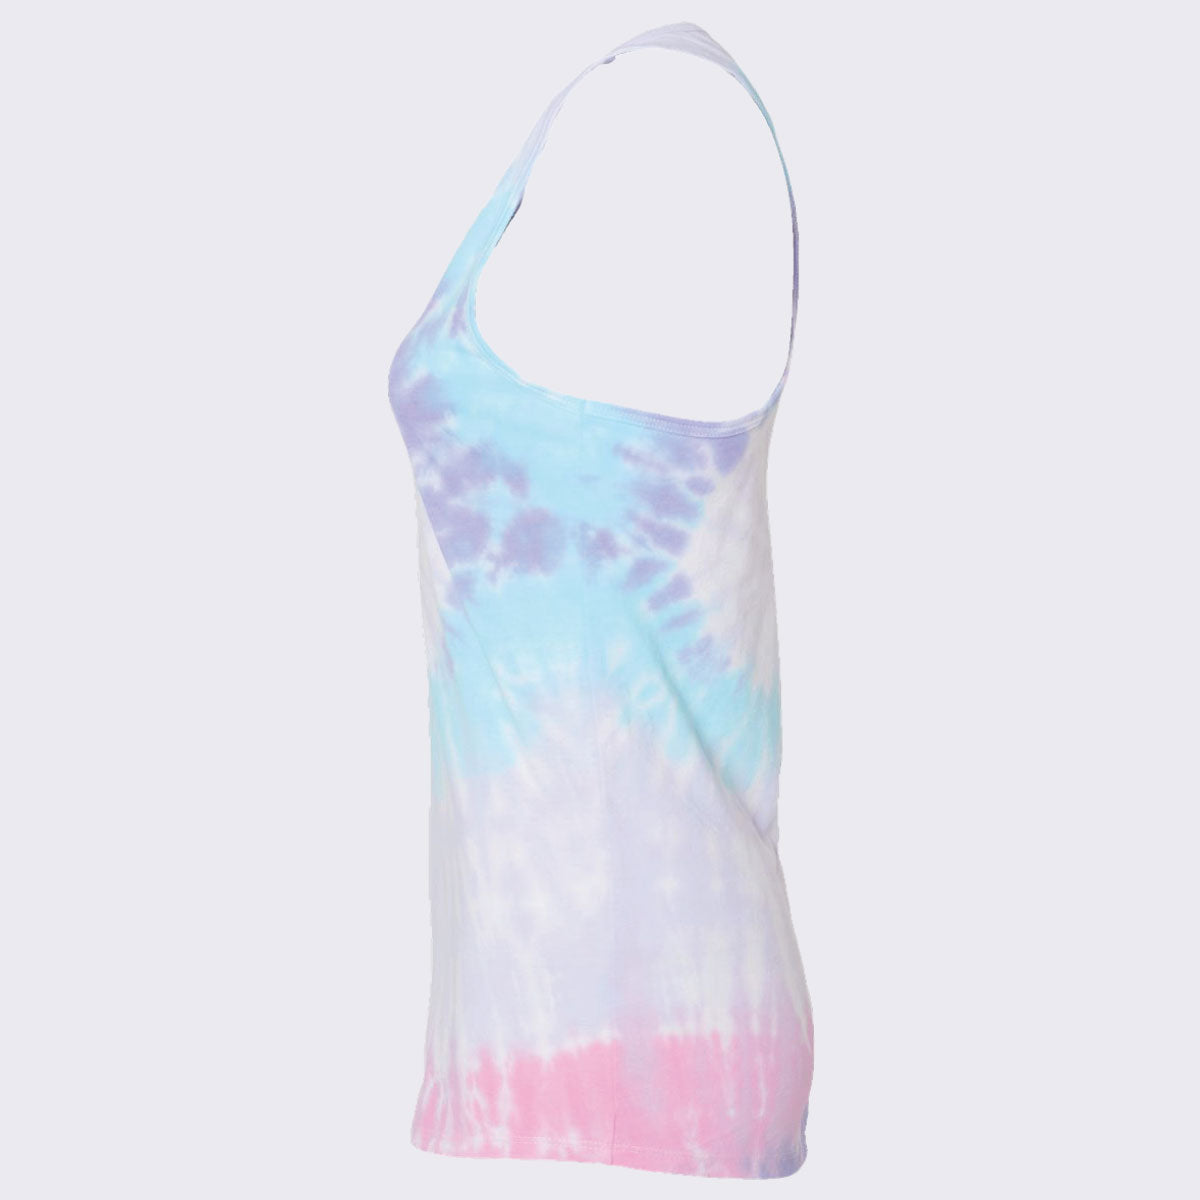 Therapy Tie-Dyed Racerback Tank Top